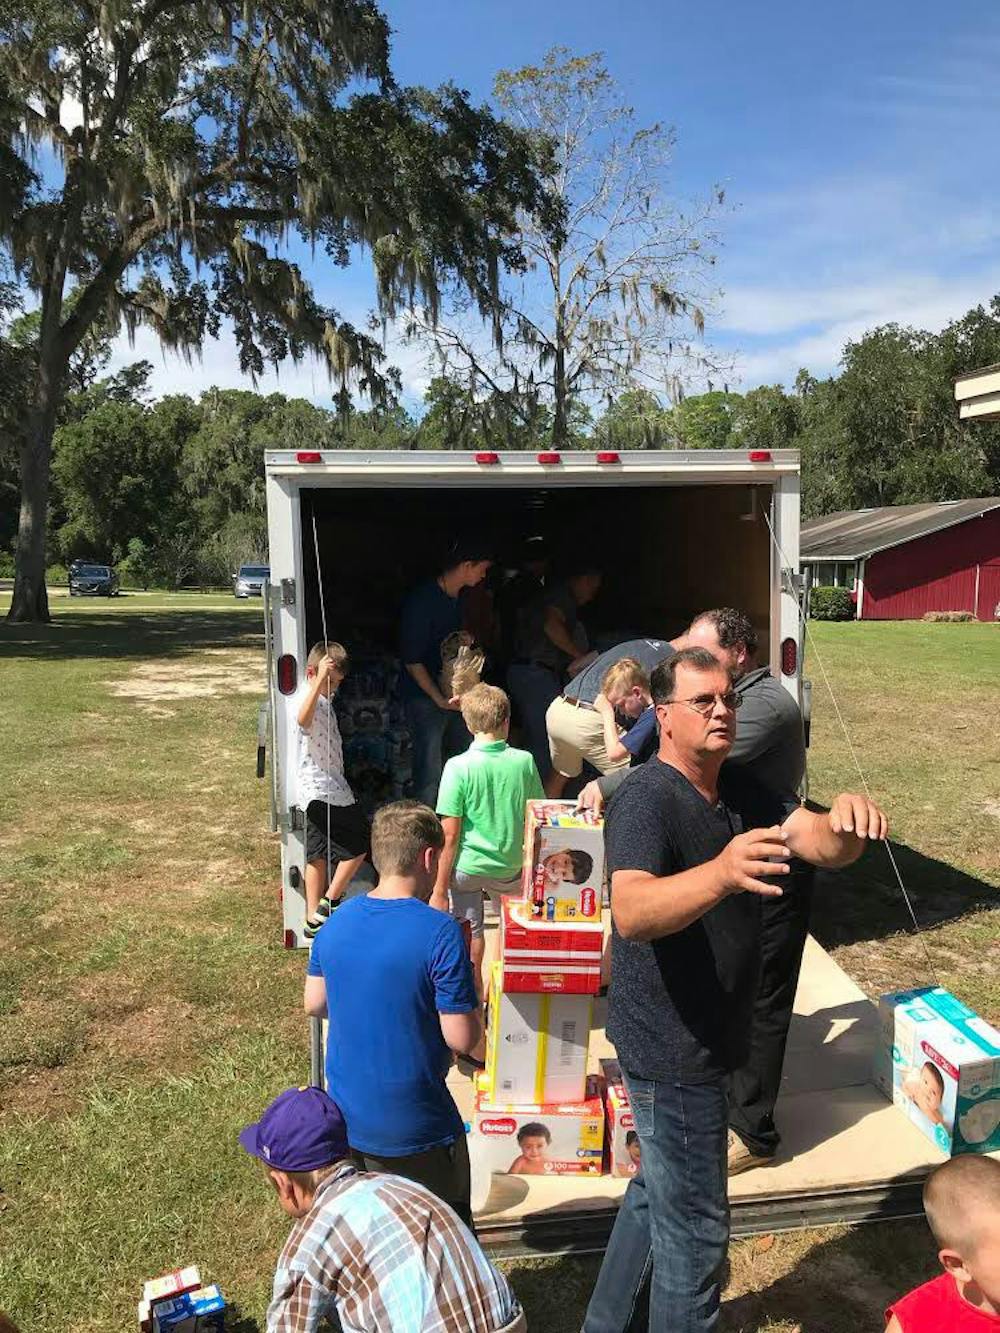 <p><span id="docs-internal-guid-e0100c53-7fff-16b9-913c-1681bb0589db"><span>Members of Anthem Church partner with Concept Companies to fill a 24-foot trailer with donations of food, water, fuel and other resources to be delivered in the Panhandle.</span></span></p>